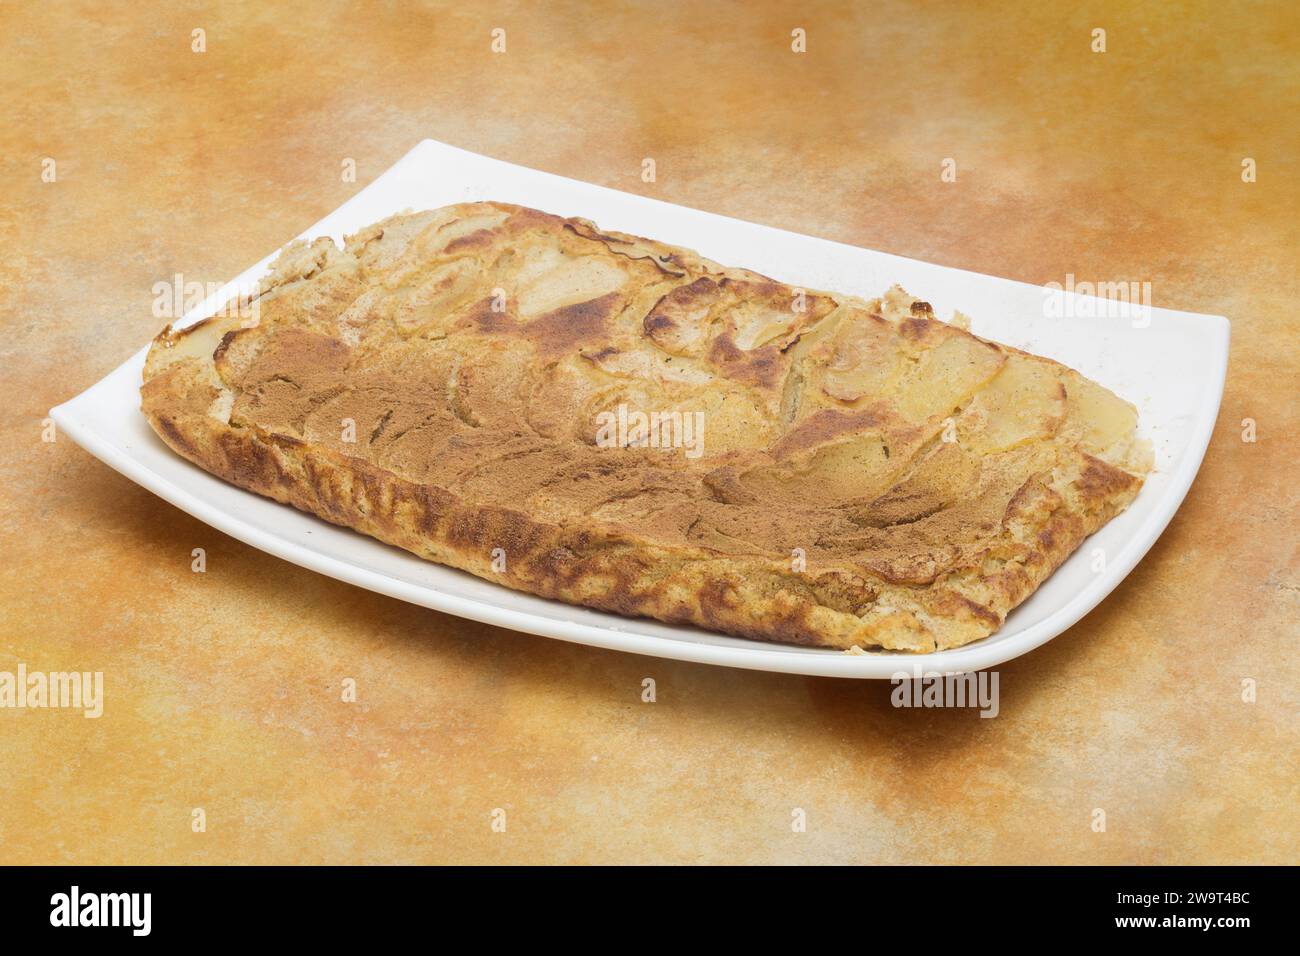 A beautifully baked apple pie with cinnamon on it, presented on a white, rectangular plate with a golden brown crust and tantalizing glimpses of the a Stock Photo